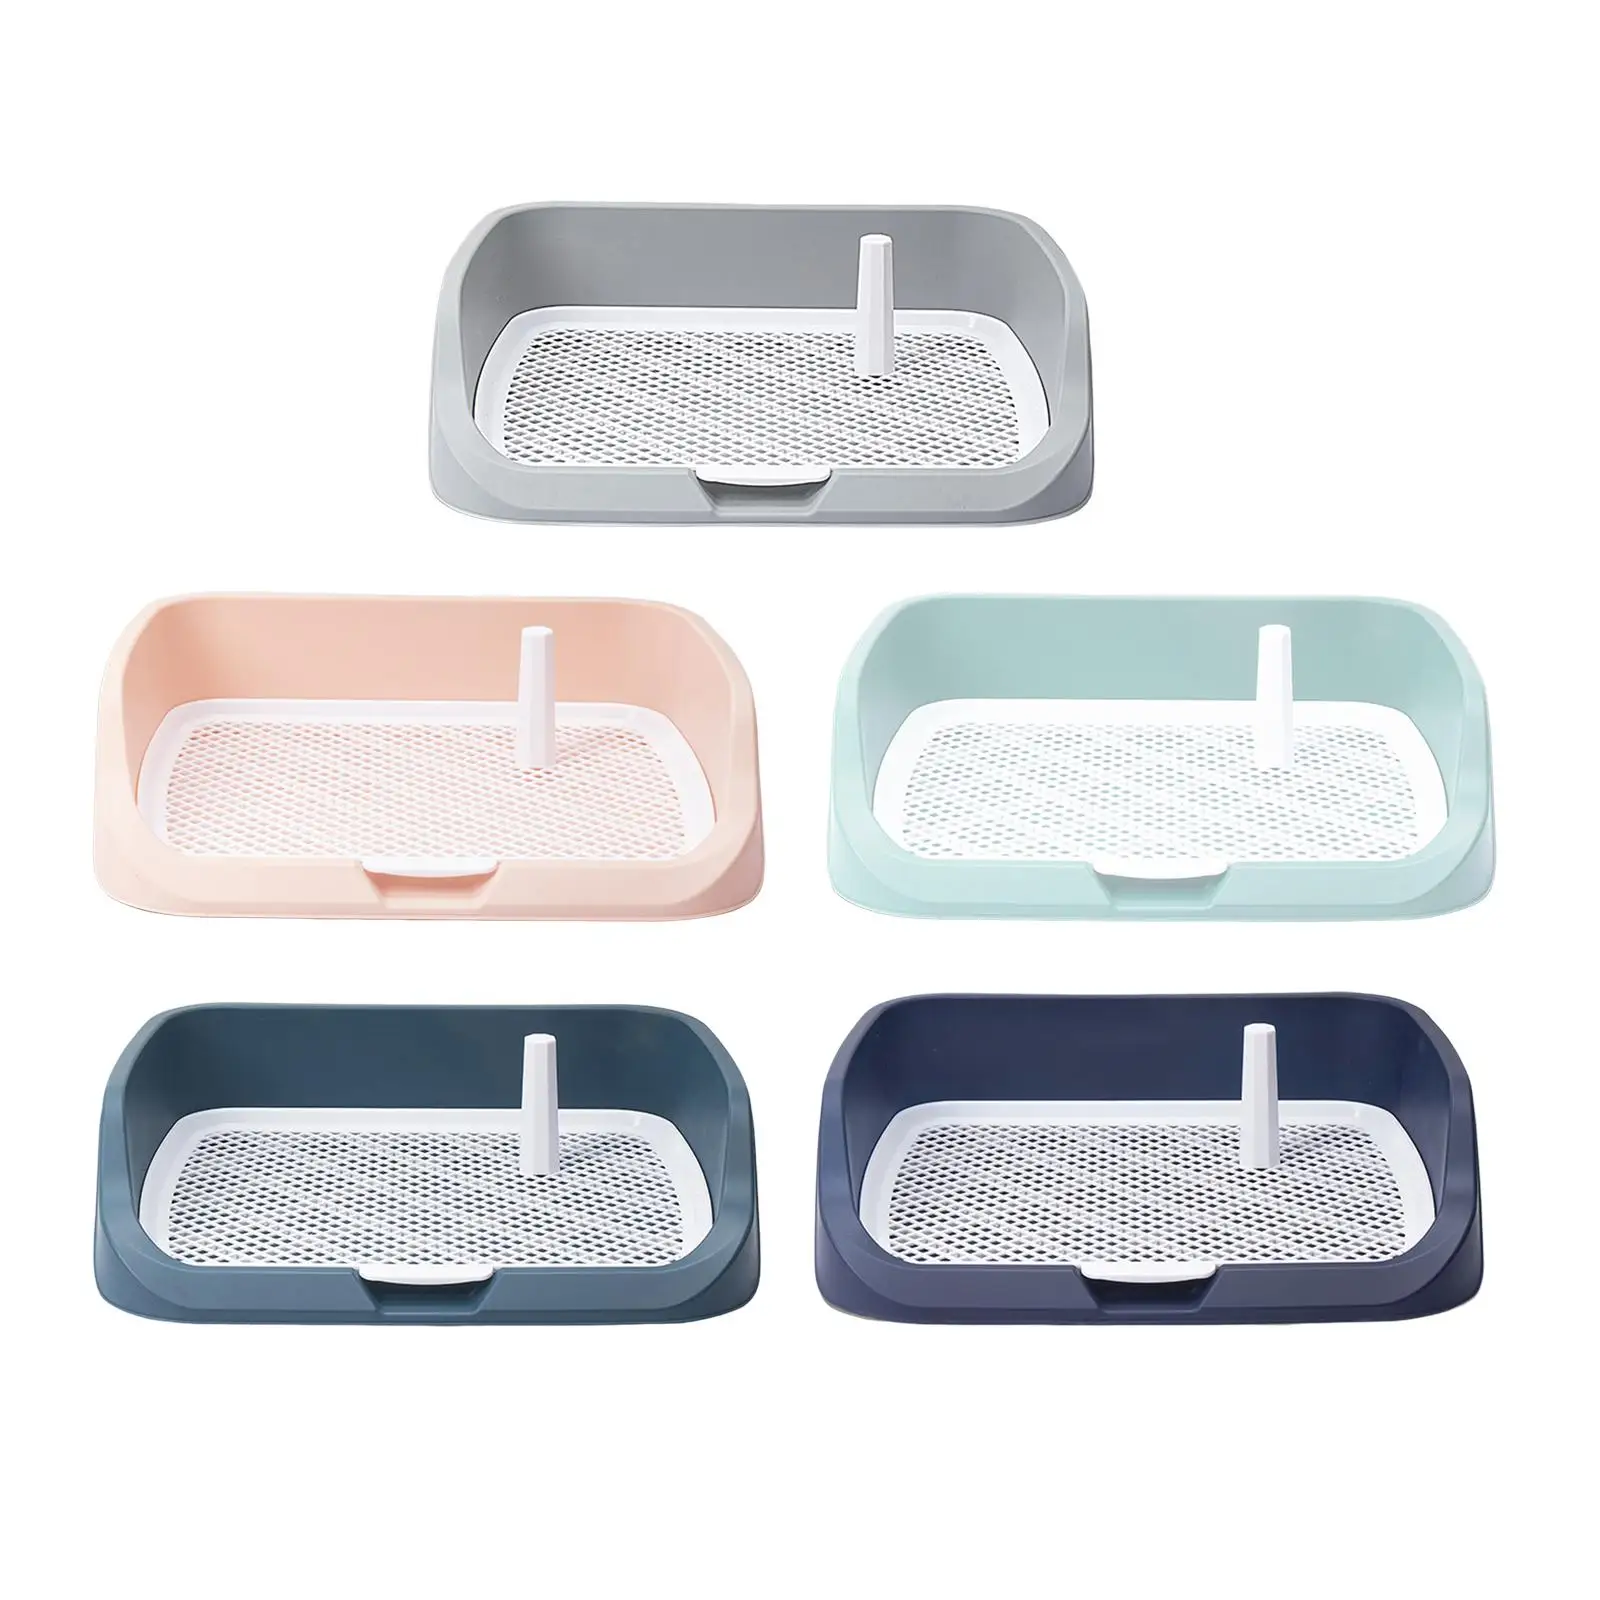 Portable Pet Dog Toilet Puppy Potty Tray Anti Splashing Dog Litter Tray Indoor Detachable Reusable for Small and Medium Dogs